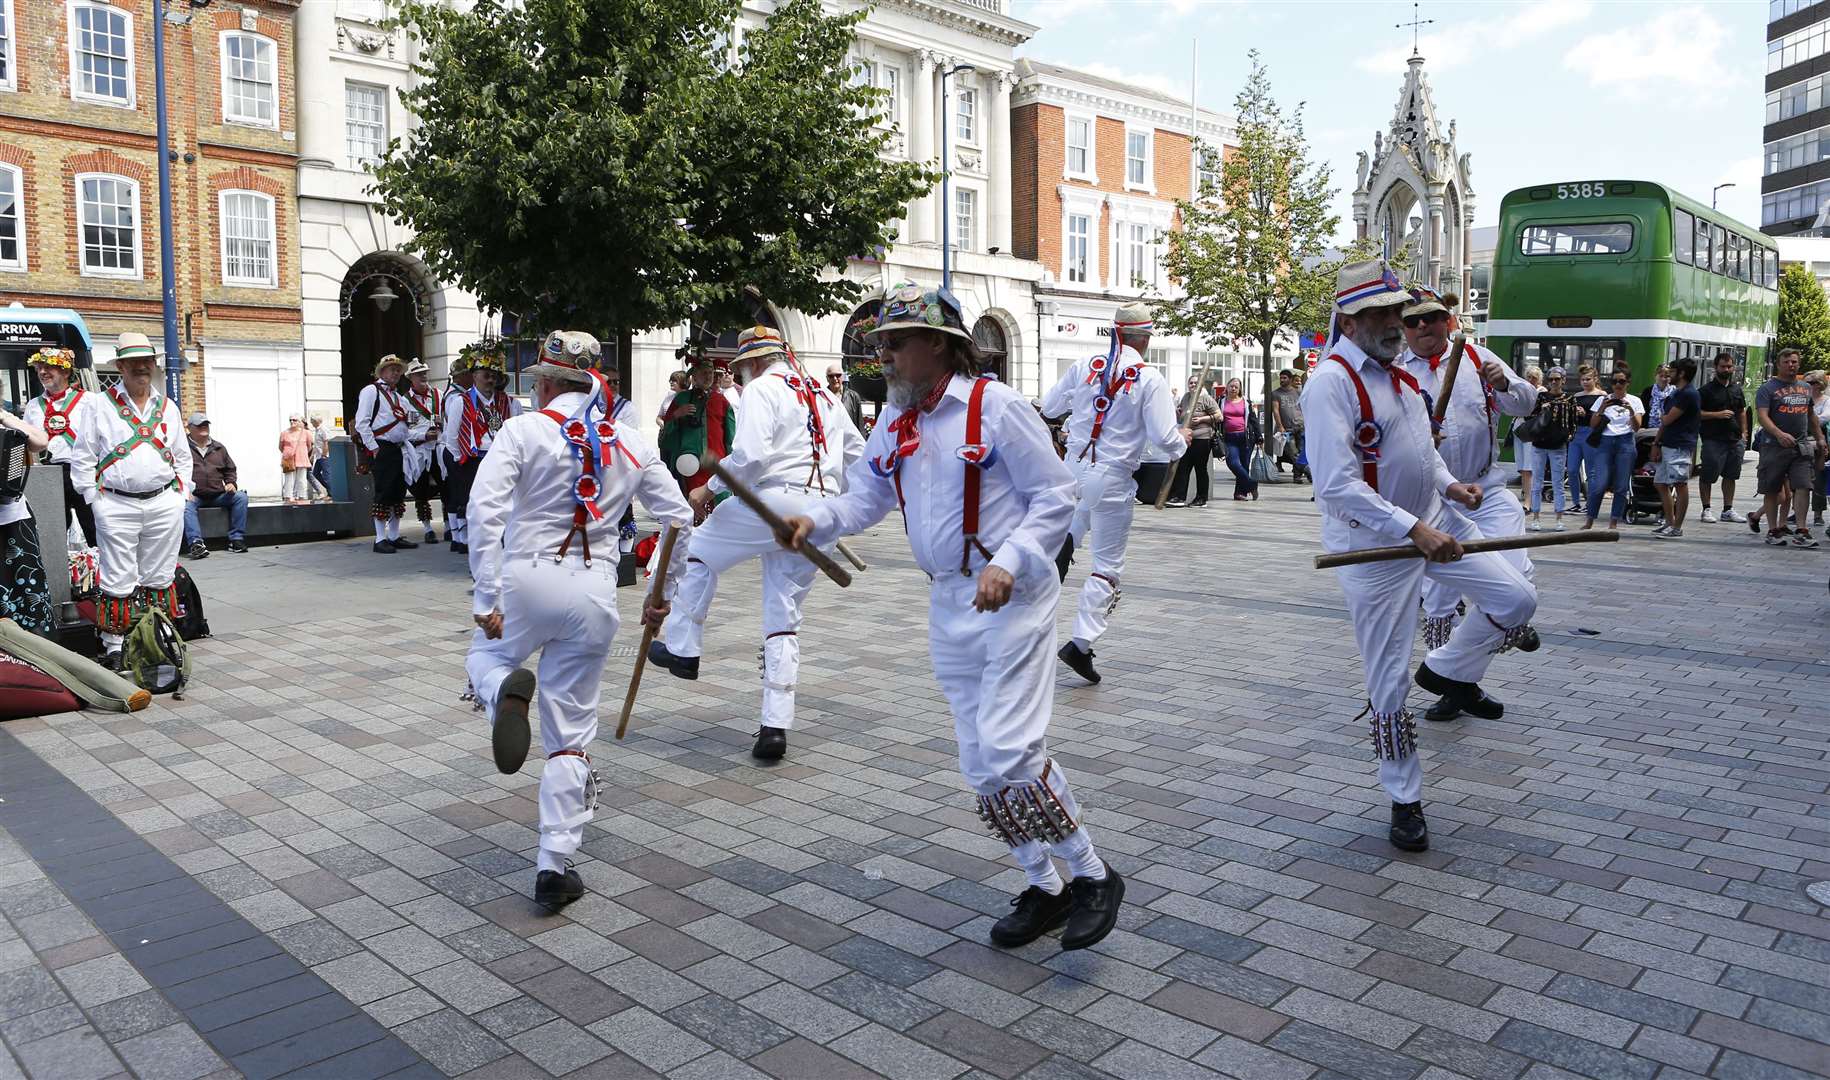 The Hartley Morris Men performed in Jubilee Square, Maidstone for their 65th anniversary